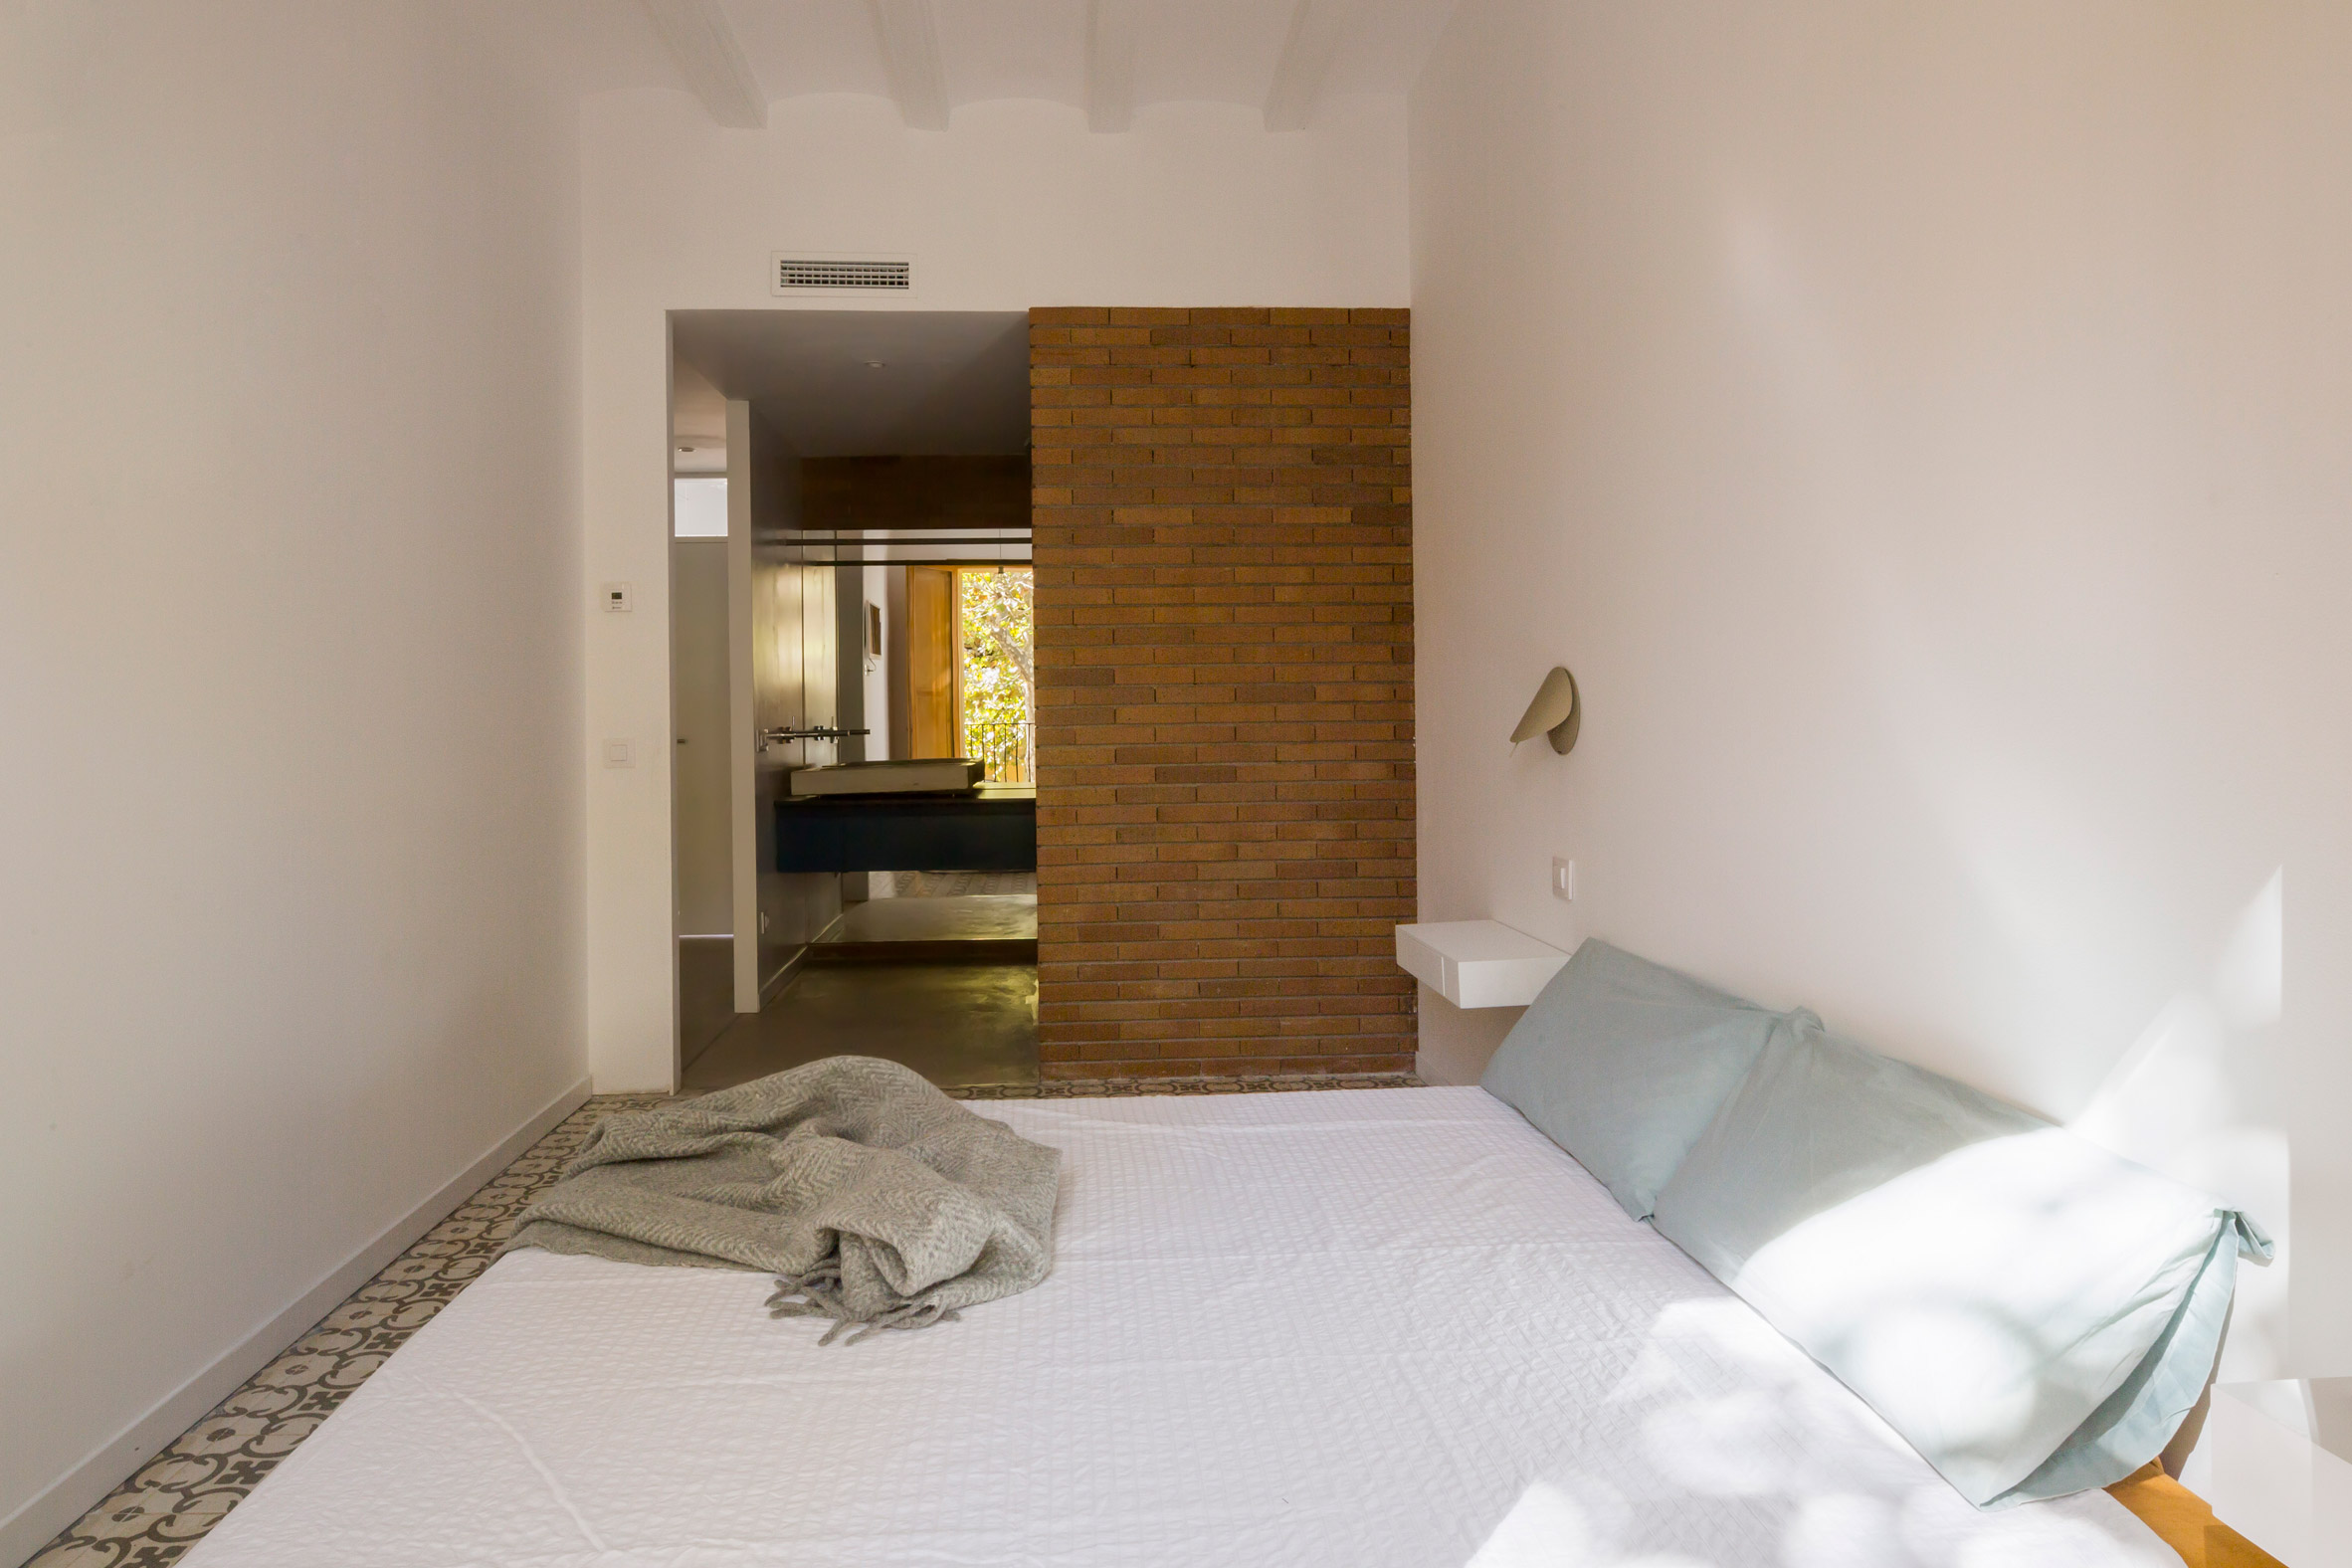 bed-and-blue-nook-architects-interiors-residential-barcelona-spain-spanish-houses-phase-one_dezeen_2364_col_7extra